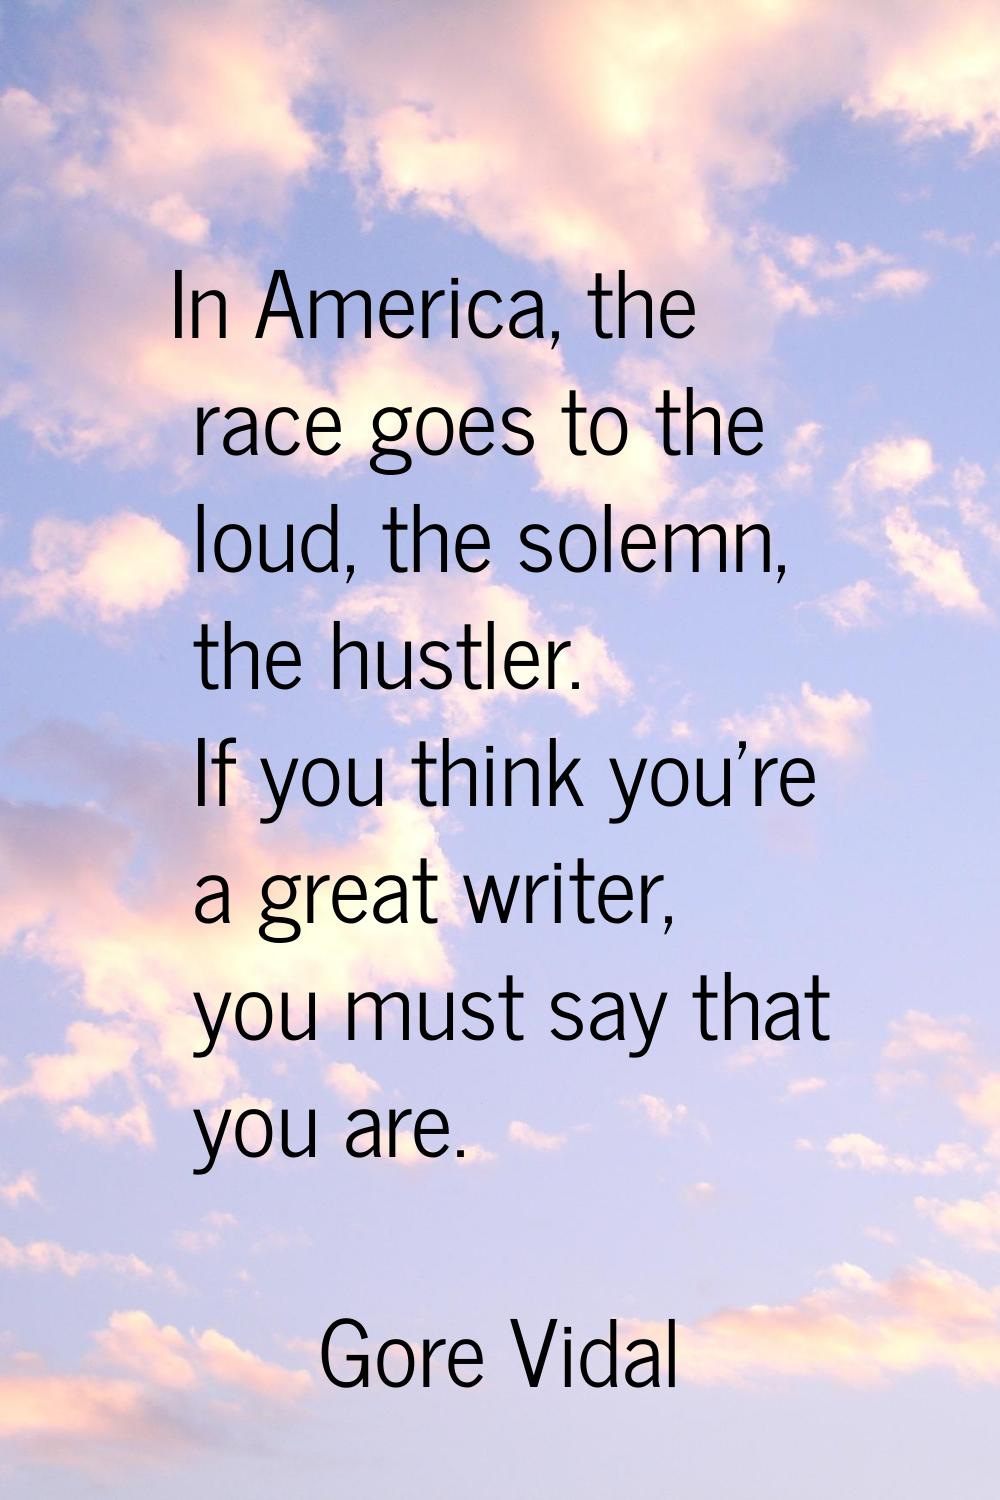 In America, the race goes to the loud, the solemn, the hustler. If you think you're a great writer,